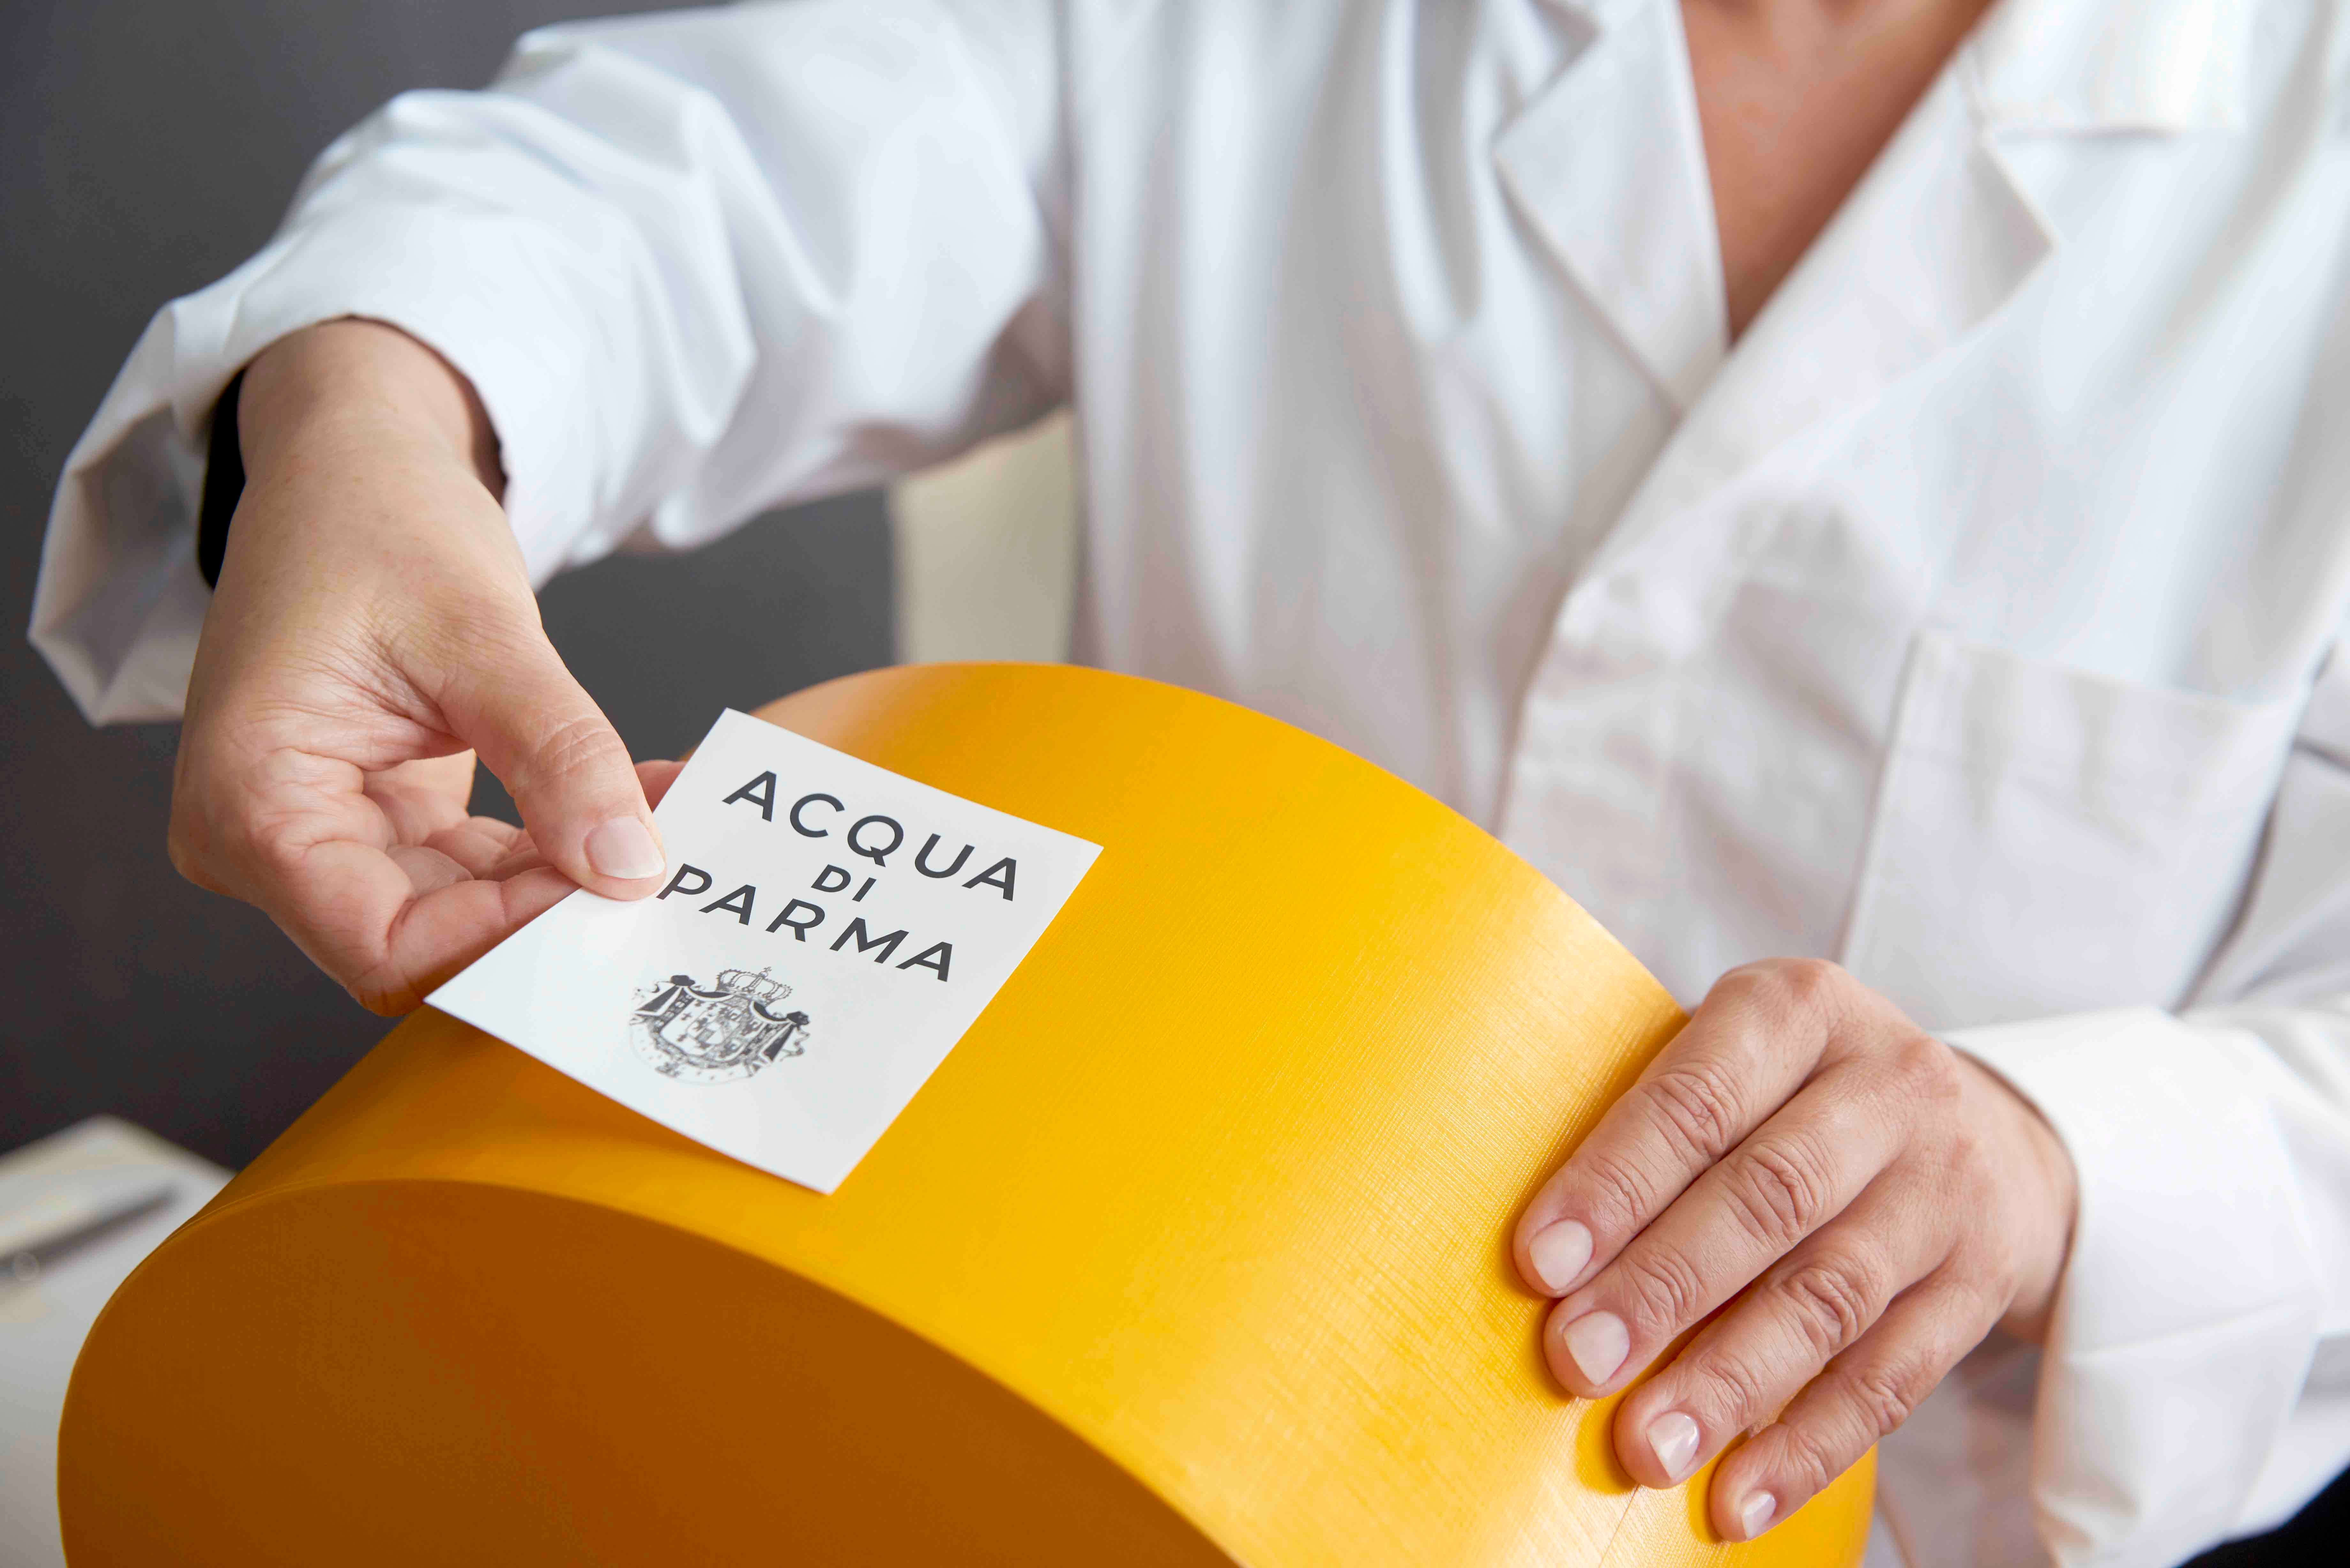 Acqua di Parma helping front line workers Italy